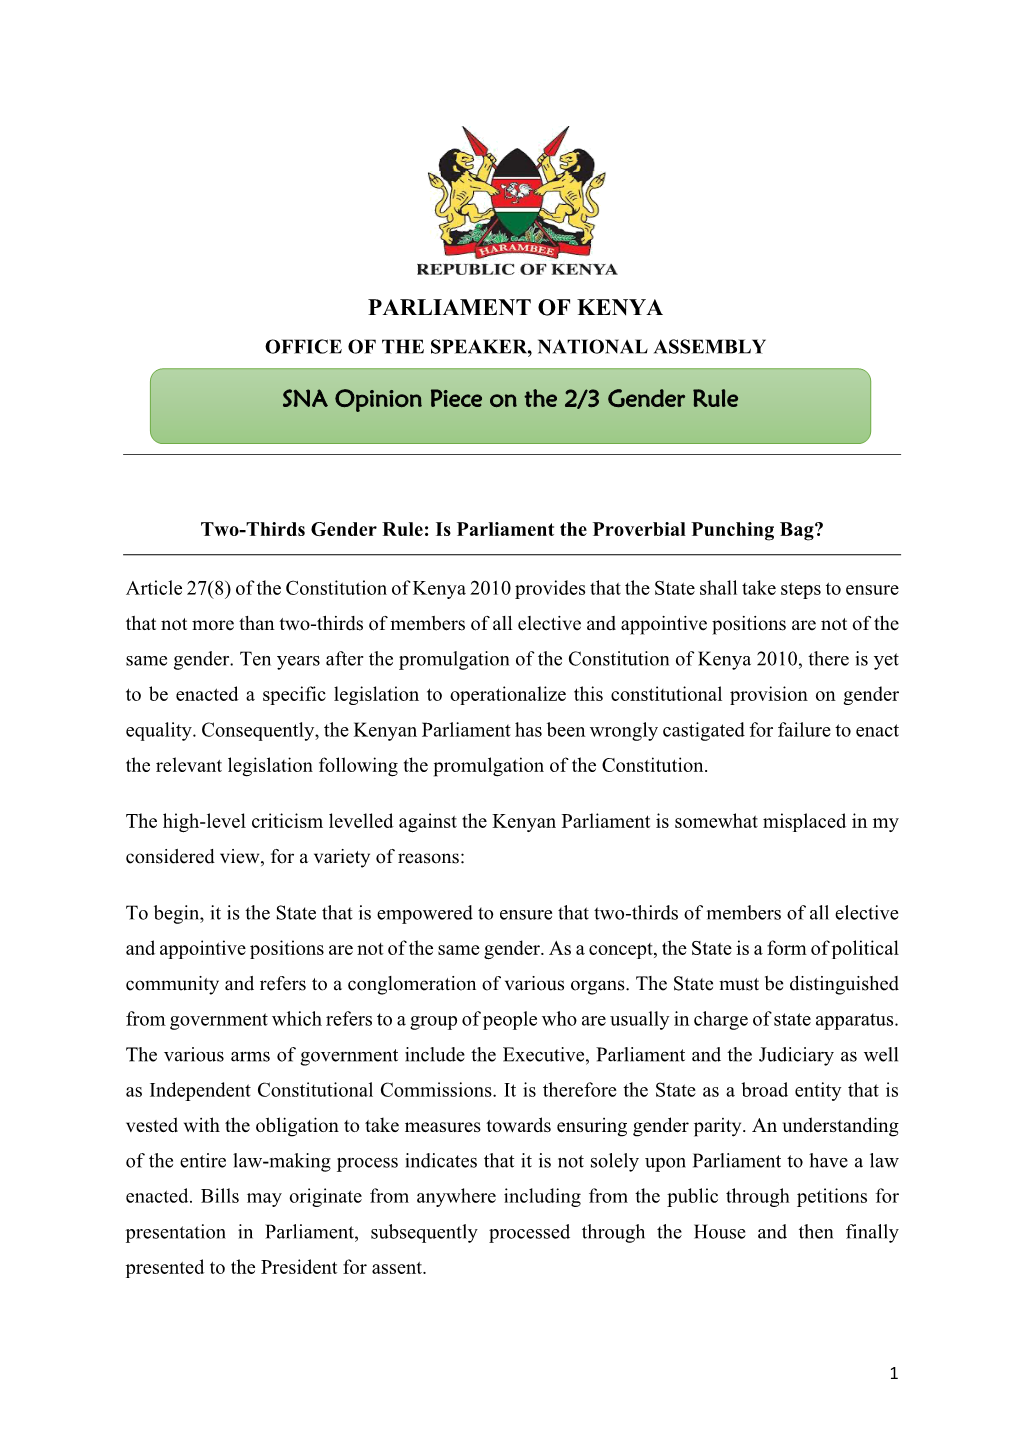 SNA Opinion Piece on the Two-Thirds Gender Rule